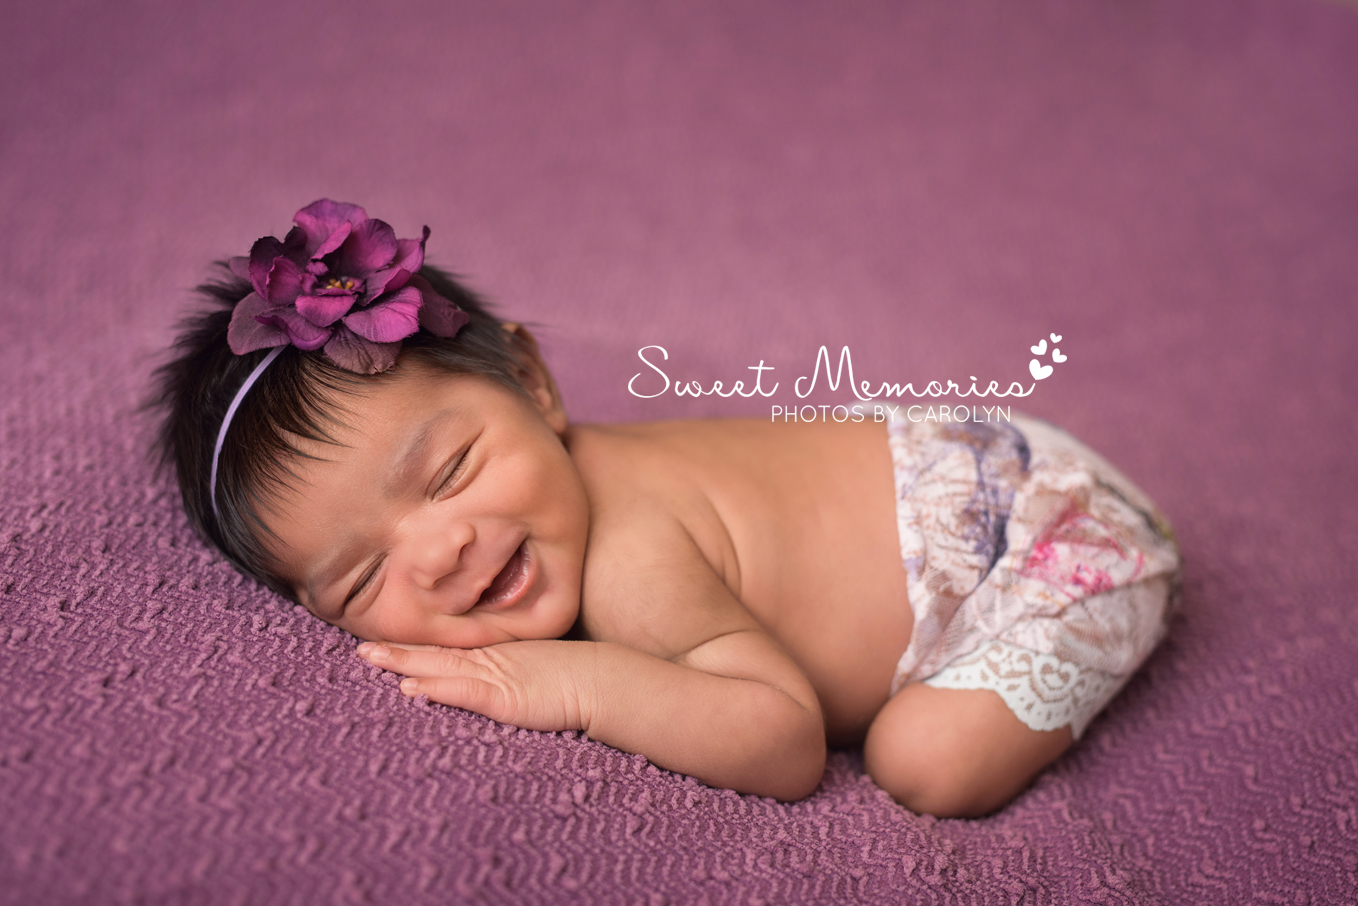 Sweet Memories Photos by Carolyn | Newtown PA | Bucks County Montgomery County Newborn Infant Baby Photographer | Indian newborn baby girl smiling